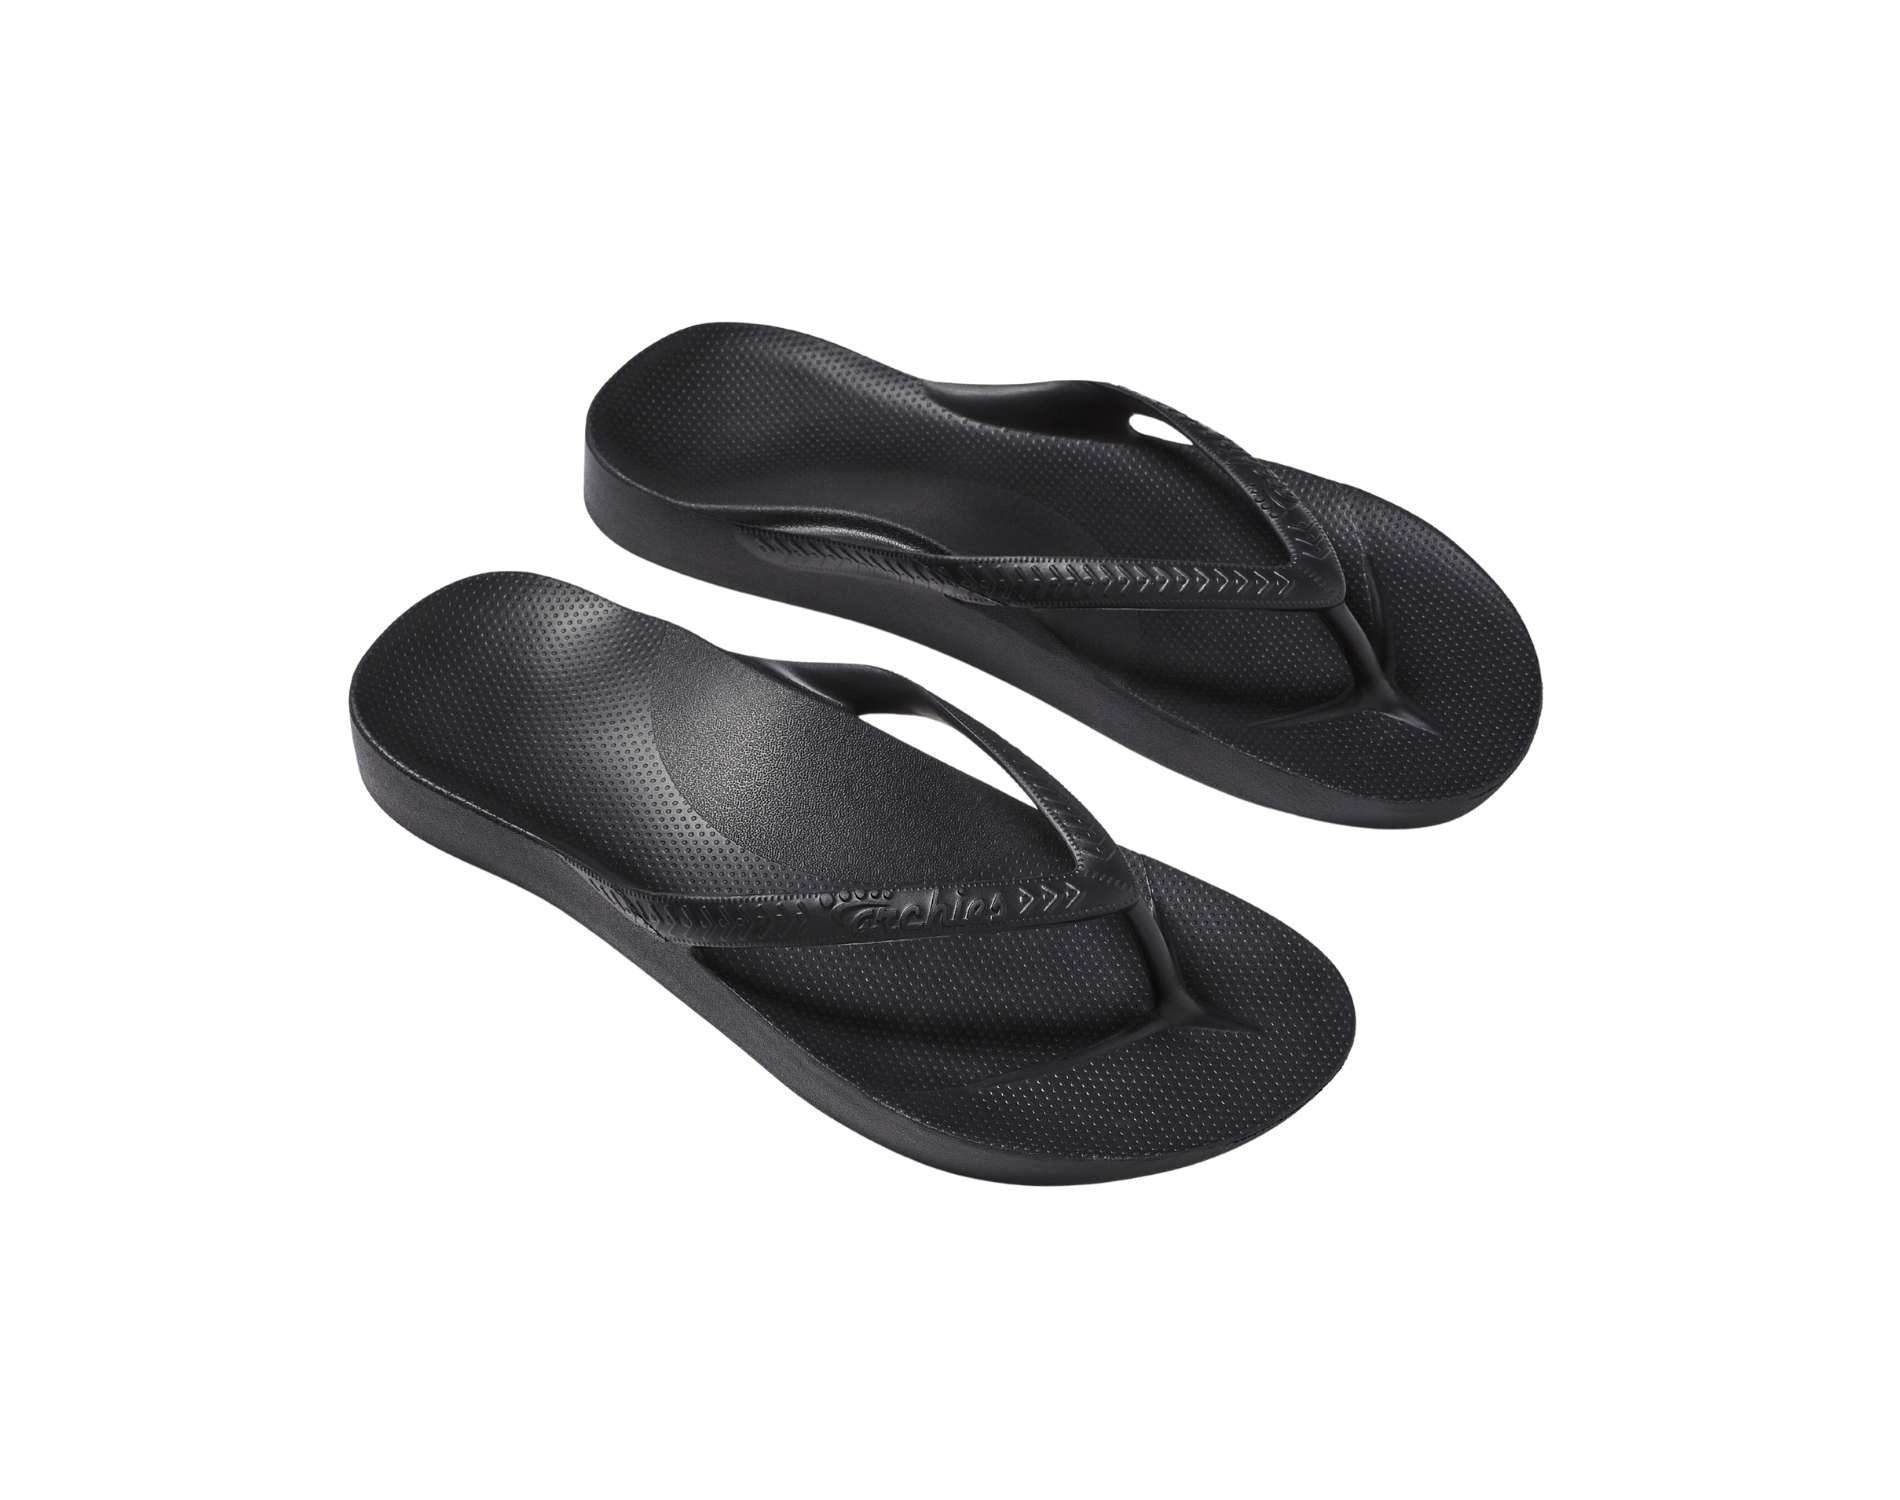 Archies arch support thongs in black colour